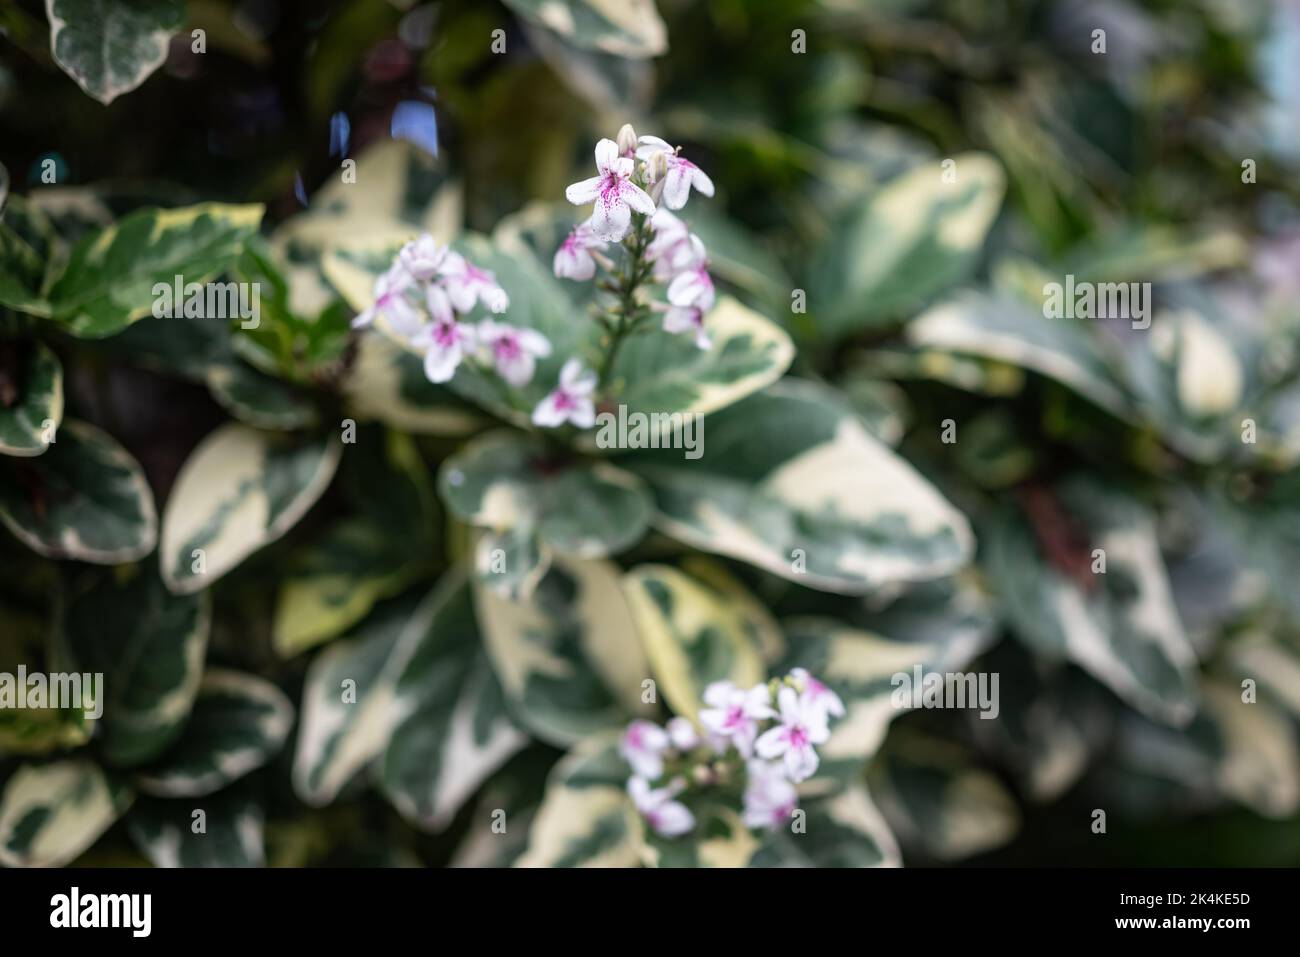 Flowers of purple false eranthemum with variegated white and green leaves Stock Photo